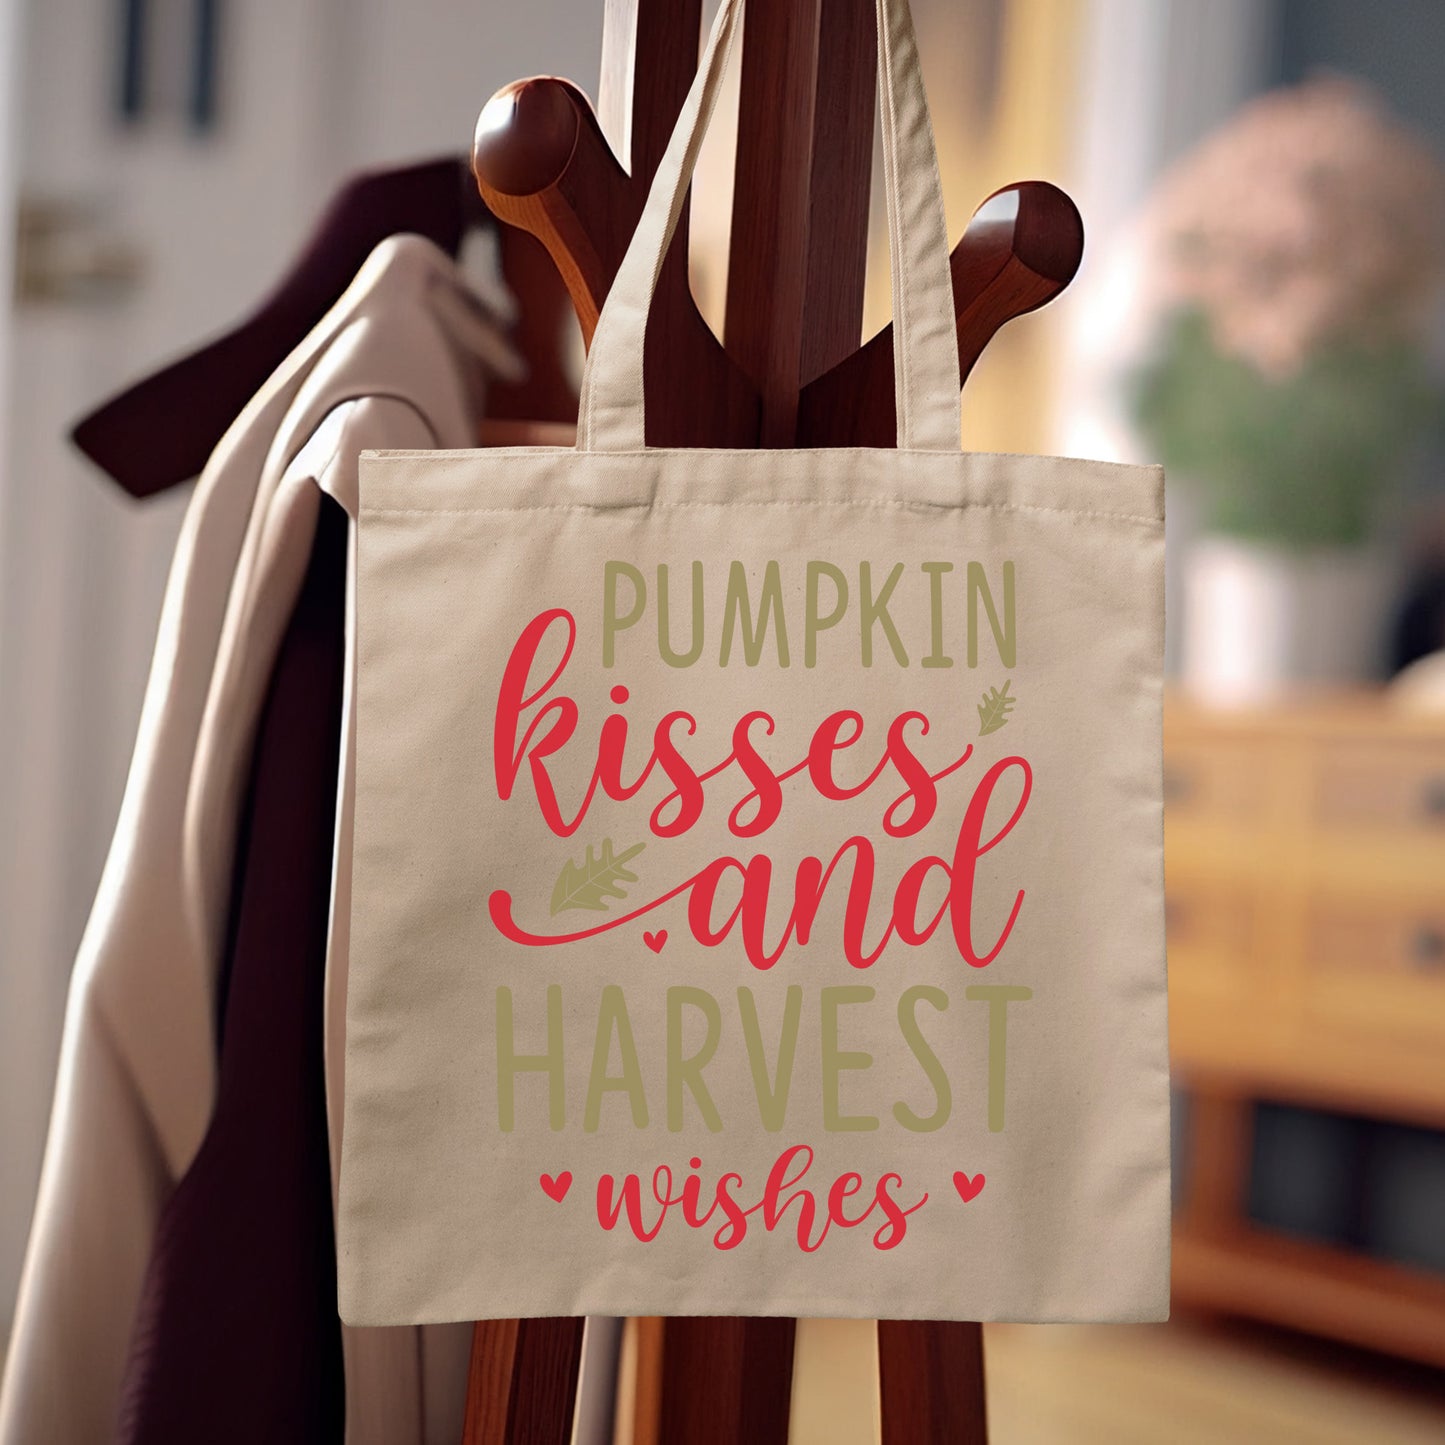 "Pumpkin Kisses And Harvest Wishes" Graphic